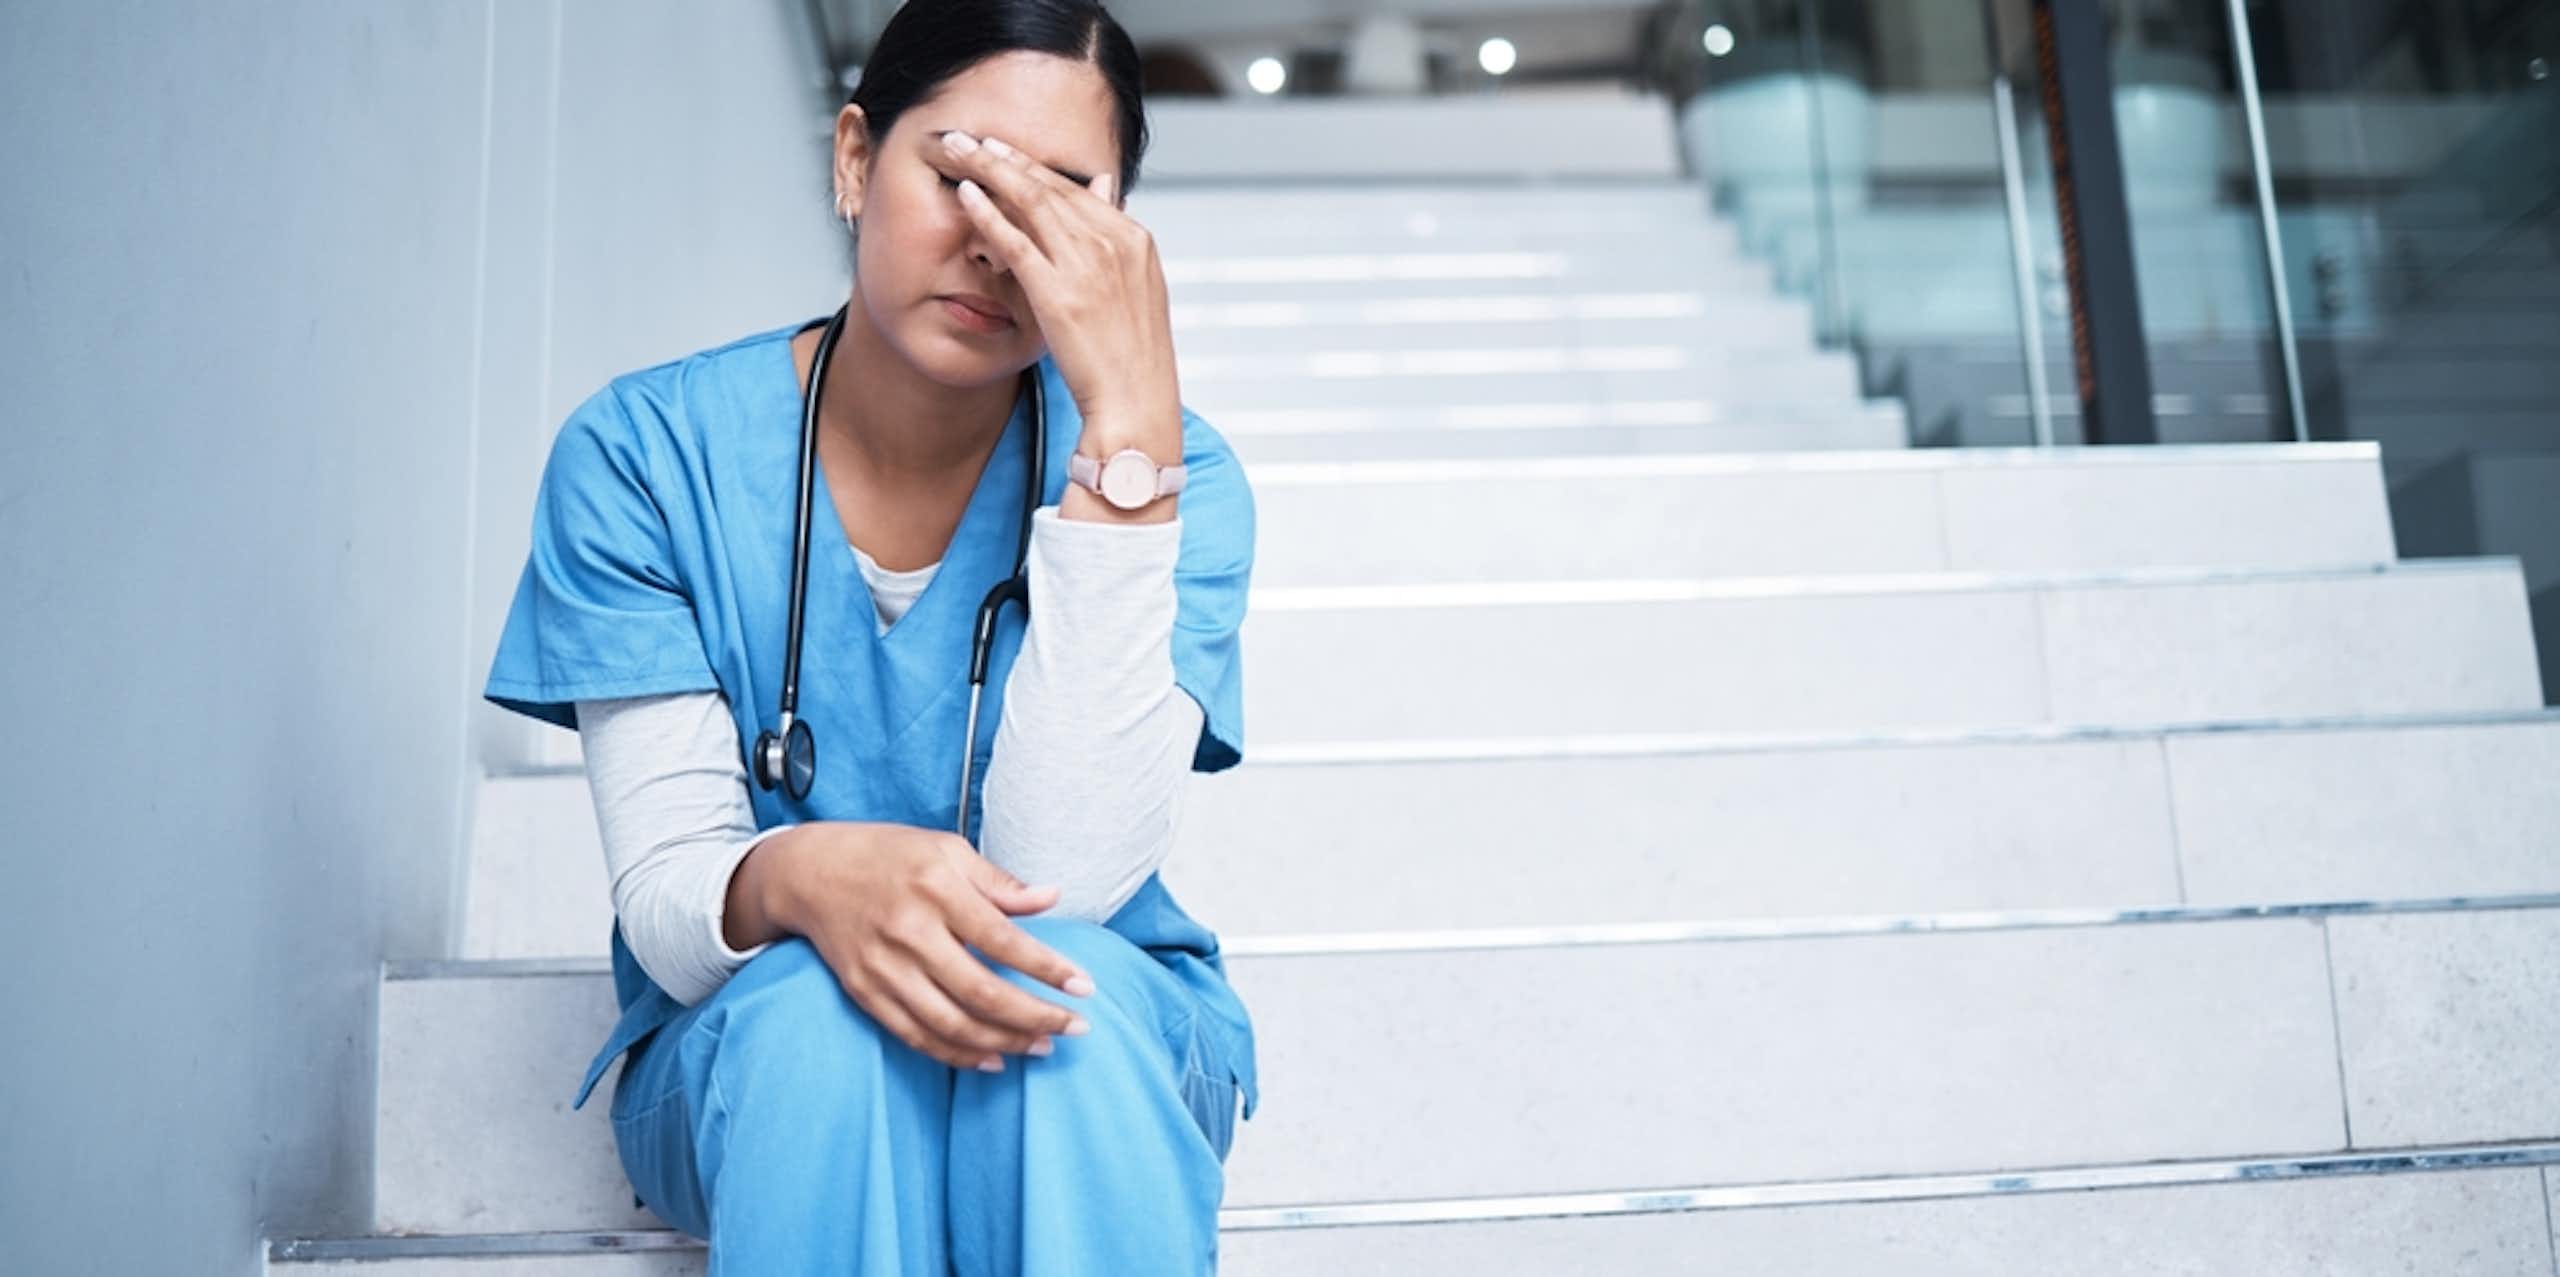 Tired health worker, hand over eyes, sitting on hospital steps